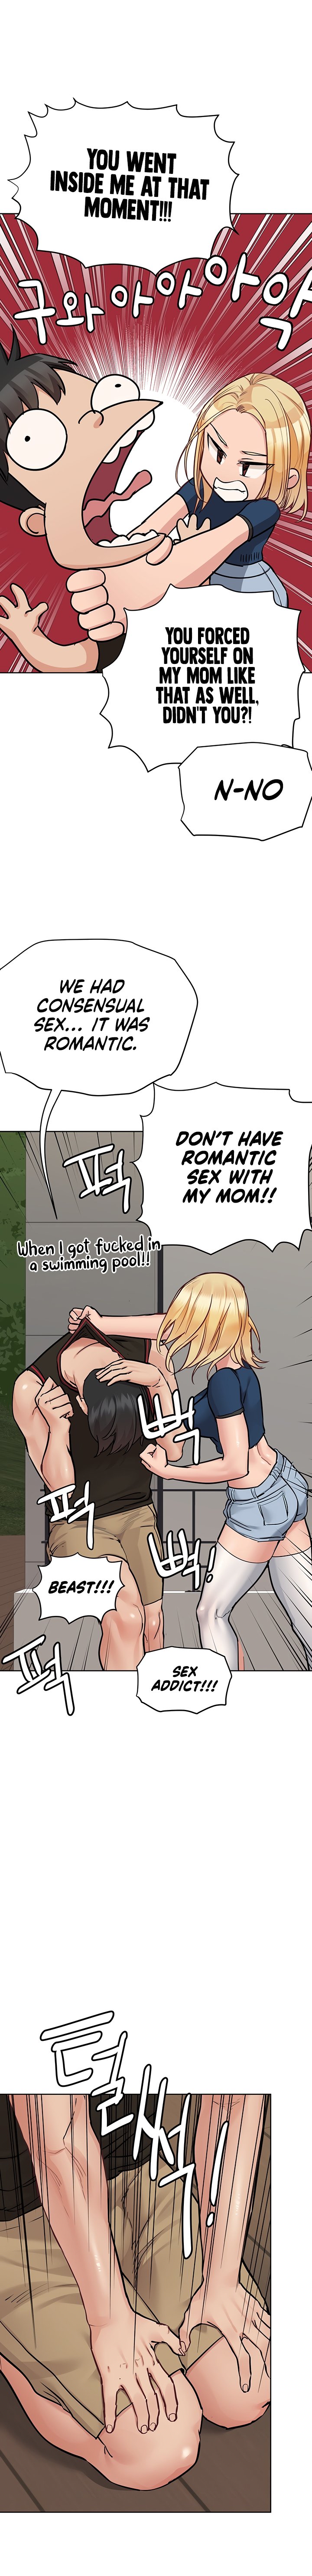 Keep it a secret from your mother! - Chapter 63 Page 6